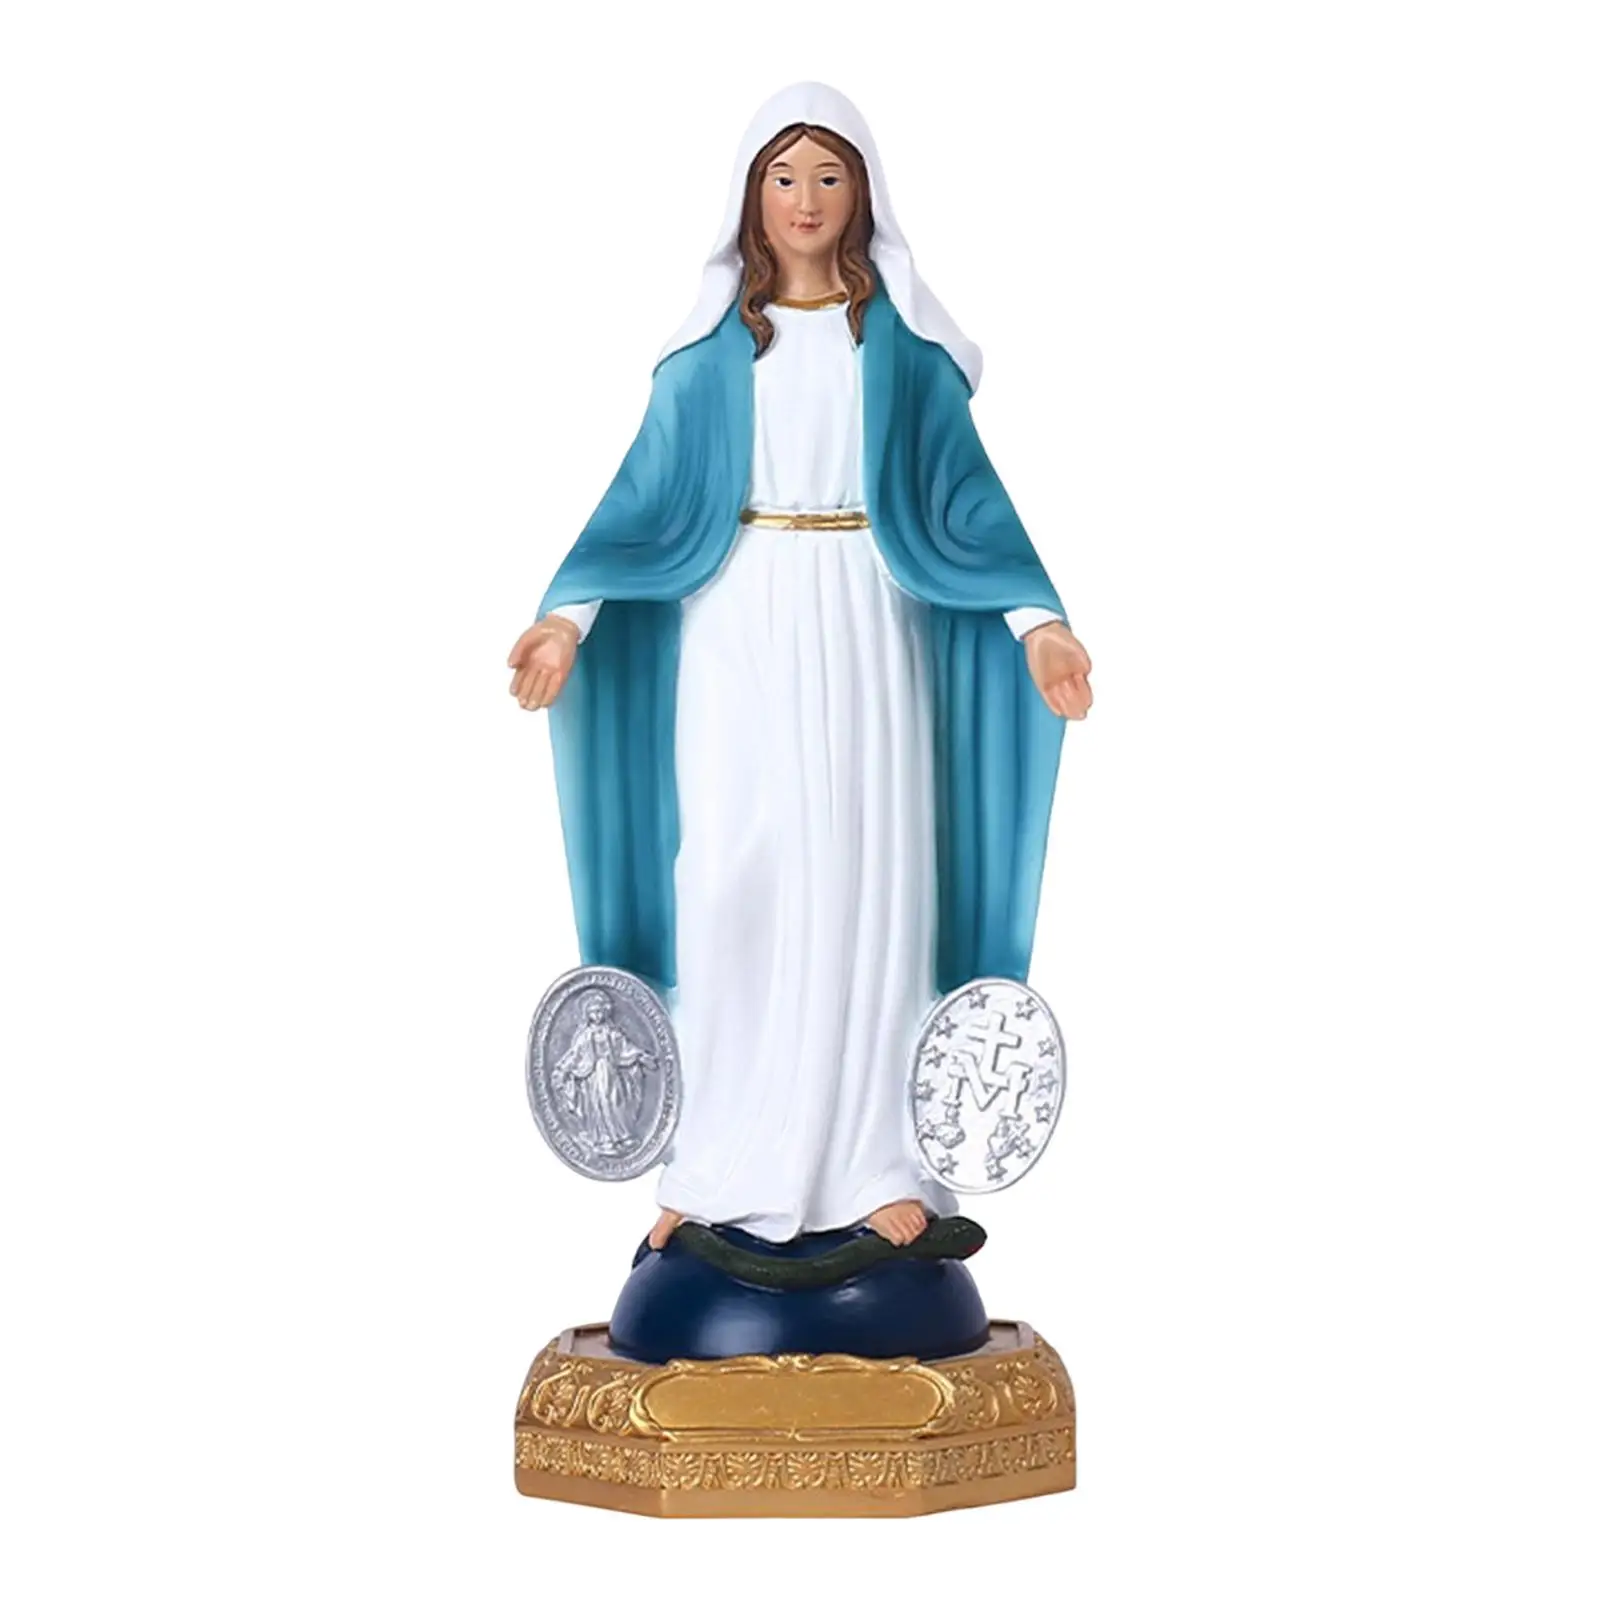 Virgin Mary Statue Statuette Catholic Virgin Mother Mary Statue Standing Statue for Table Bookshelf Home Bedroom Religious